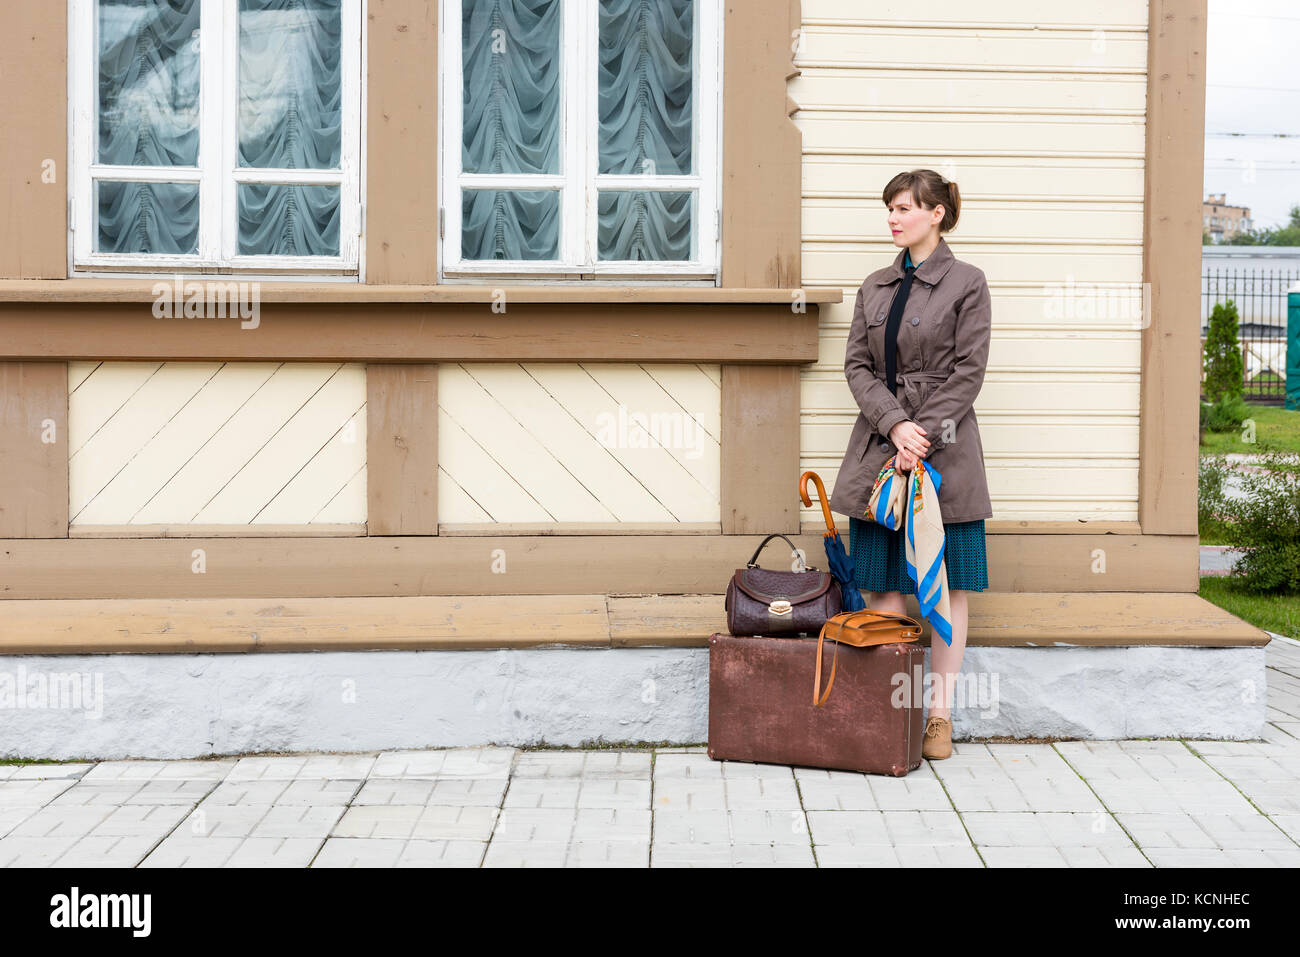 young woman waiting for the arrival of a train at a small station in retro style Stock Photo